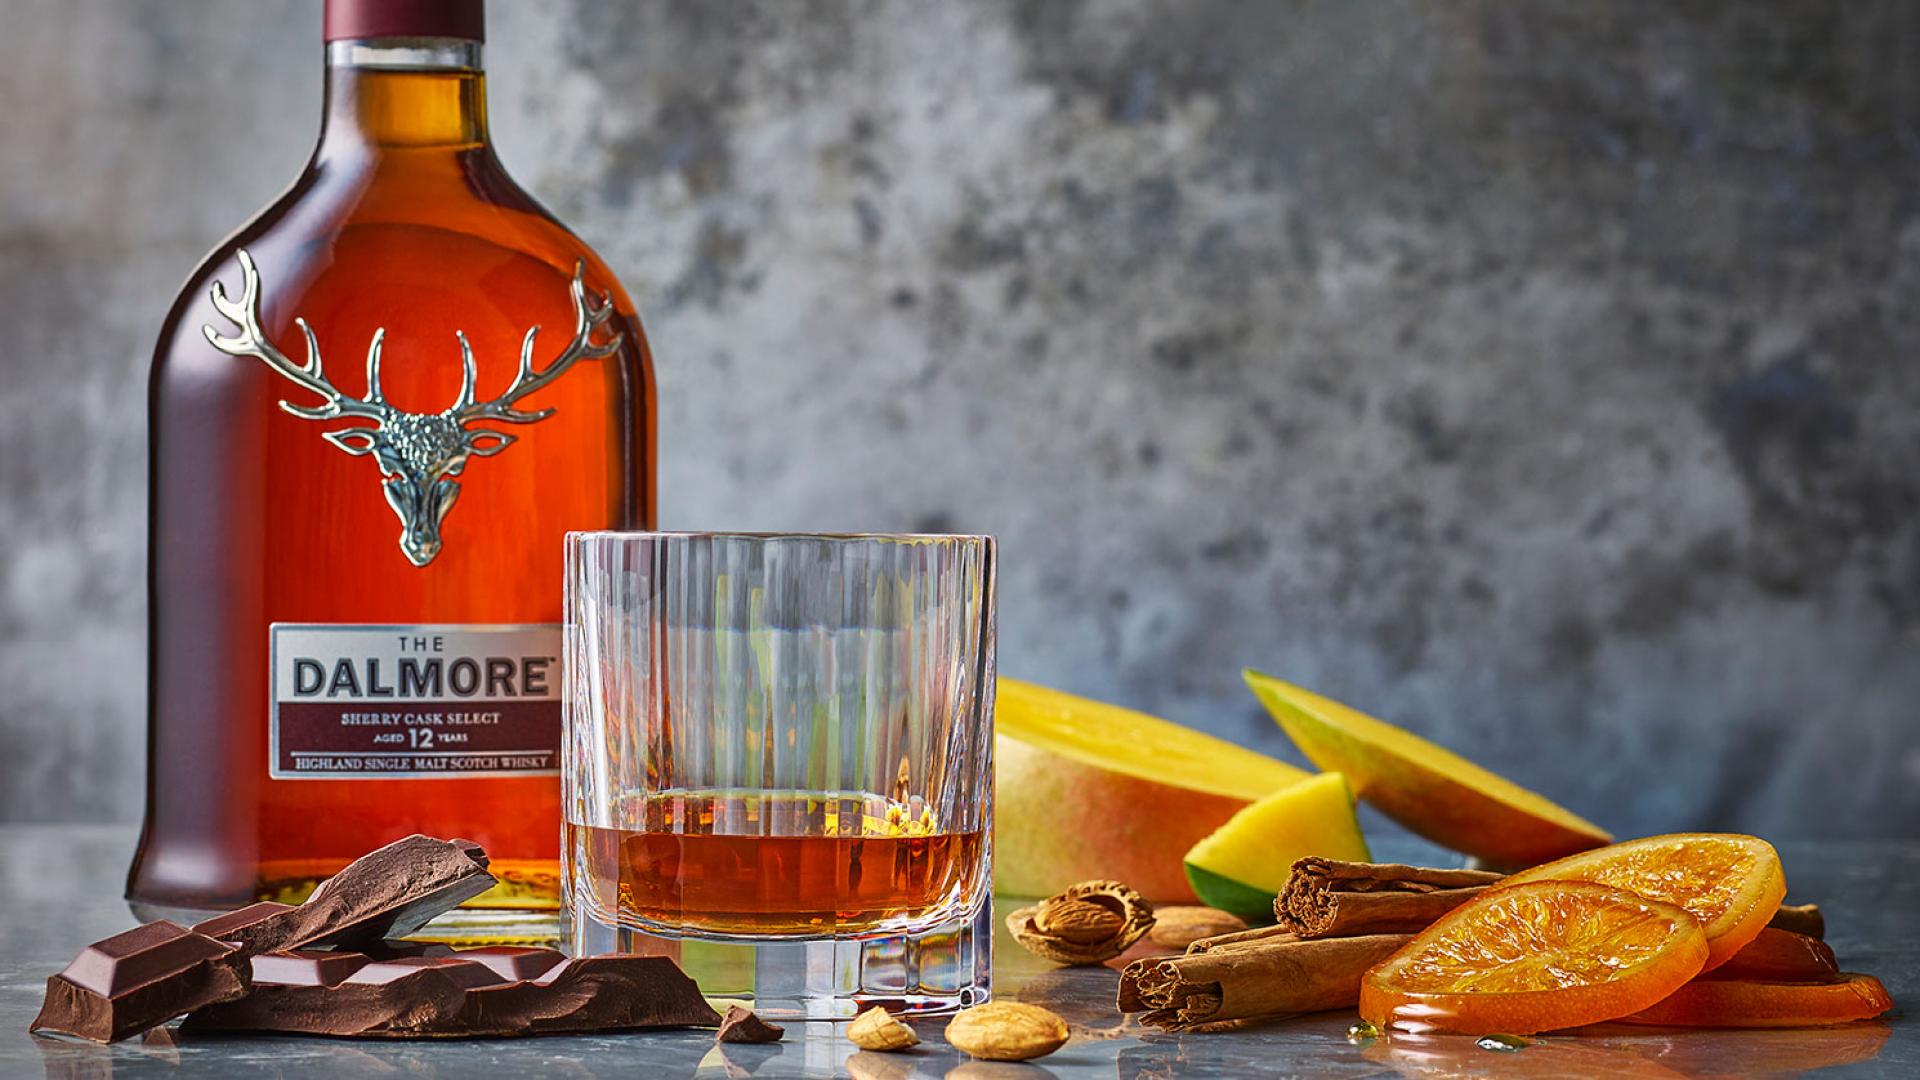 Christmas food and drink gifts 2021 | The Dalmore 12 Year Old